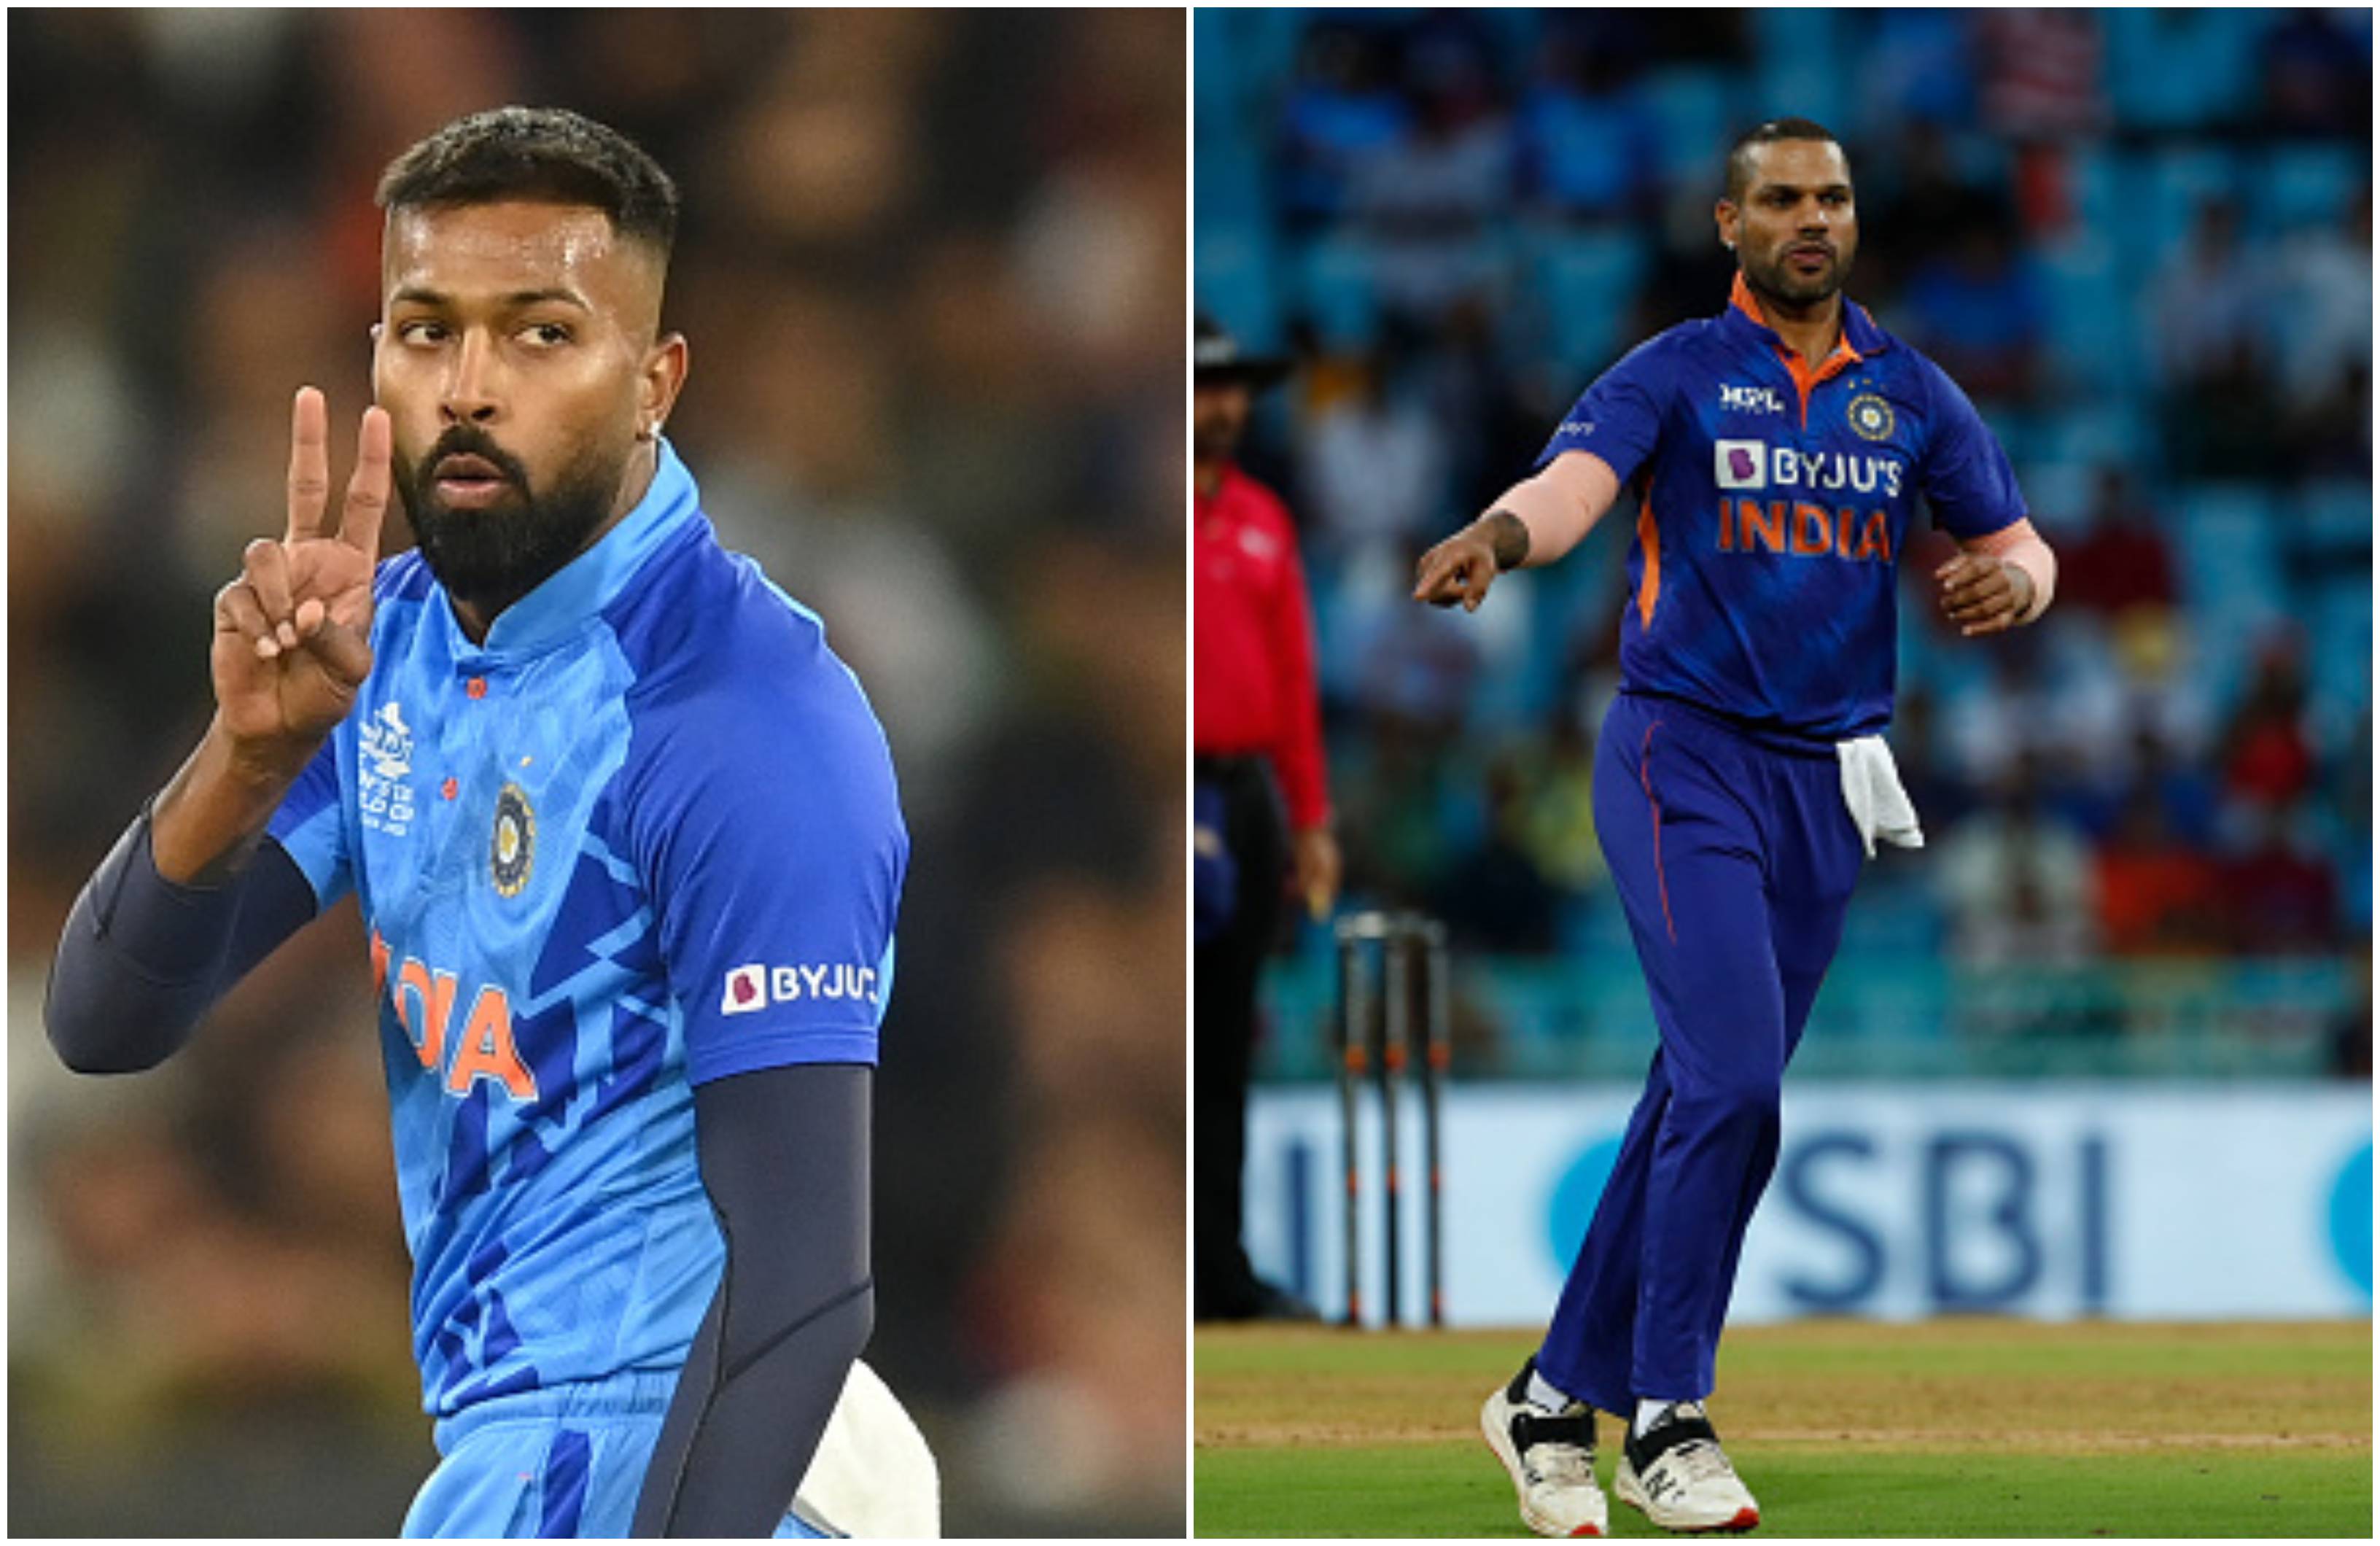 Hardik Pandya and Shikhar Dhawan will lead India on the white-ball tour of New Zealand | Getty